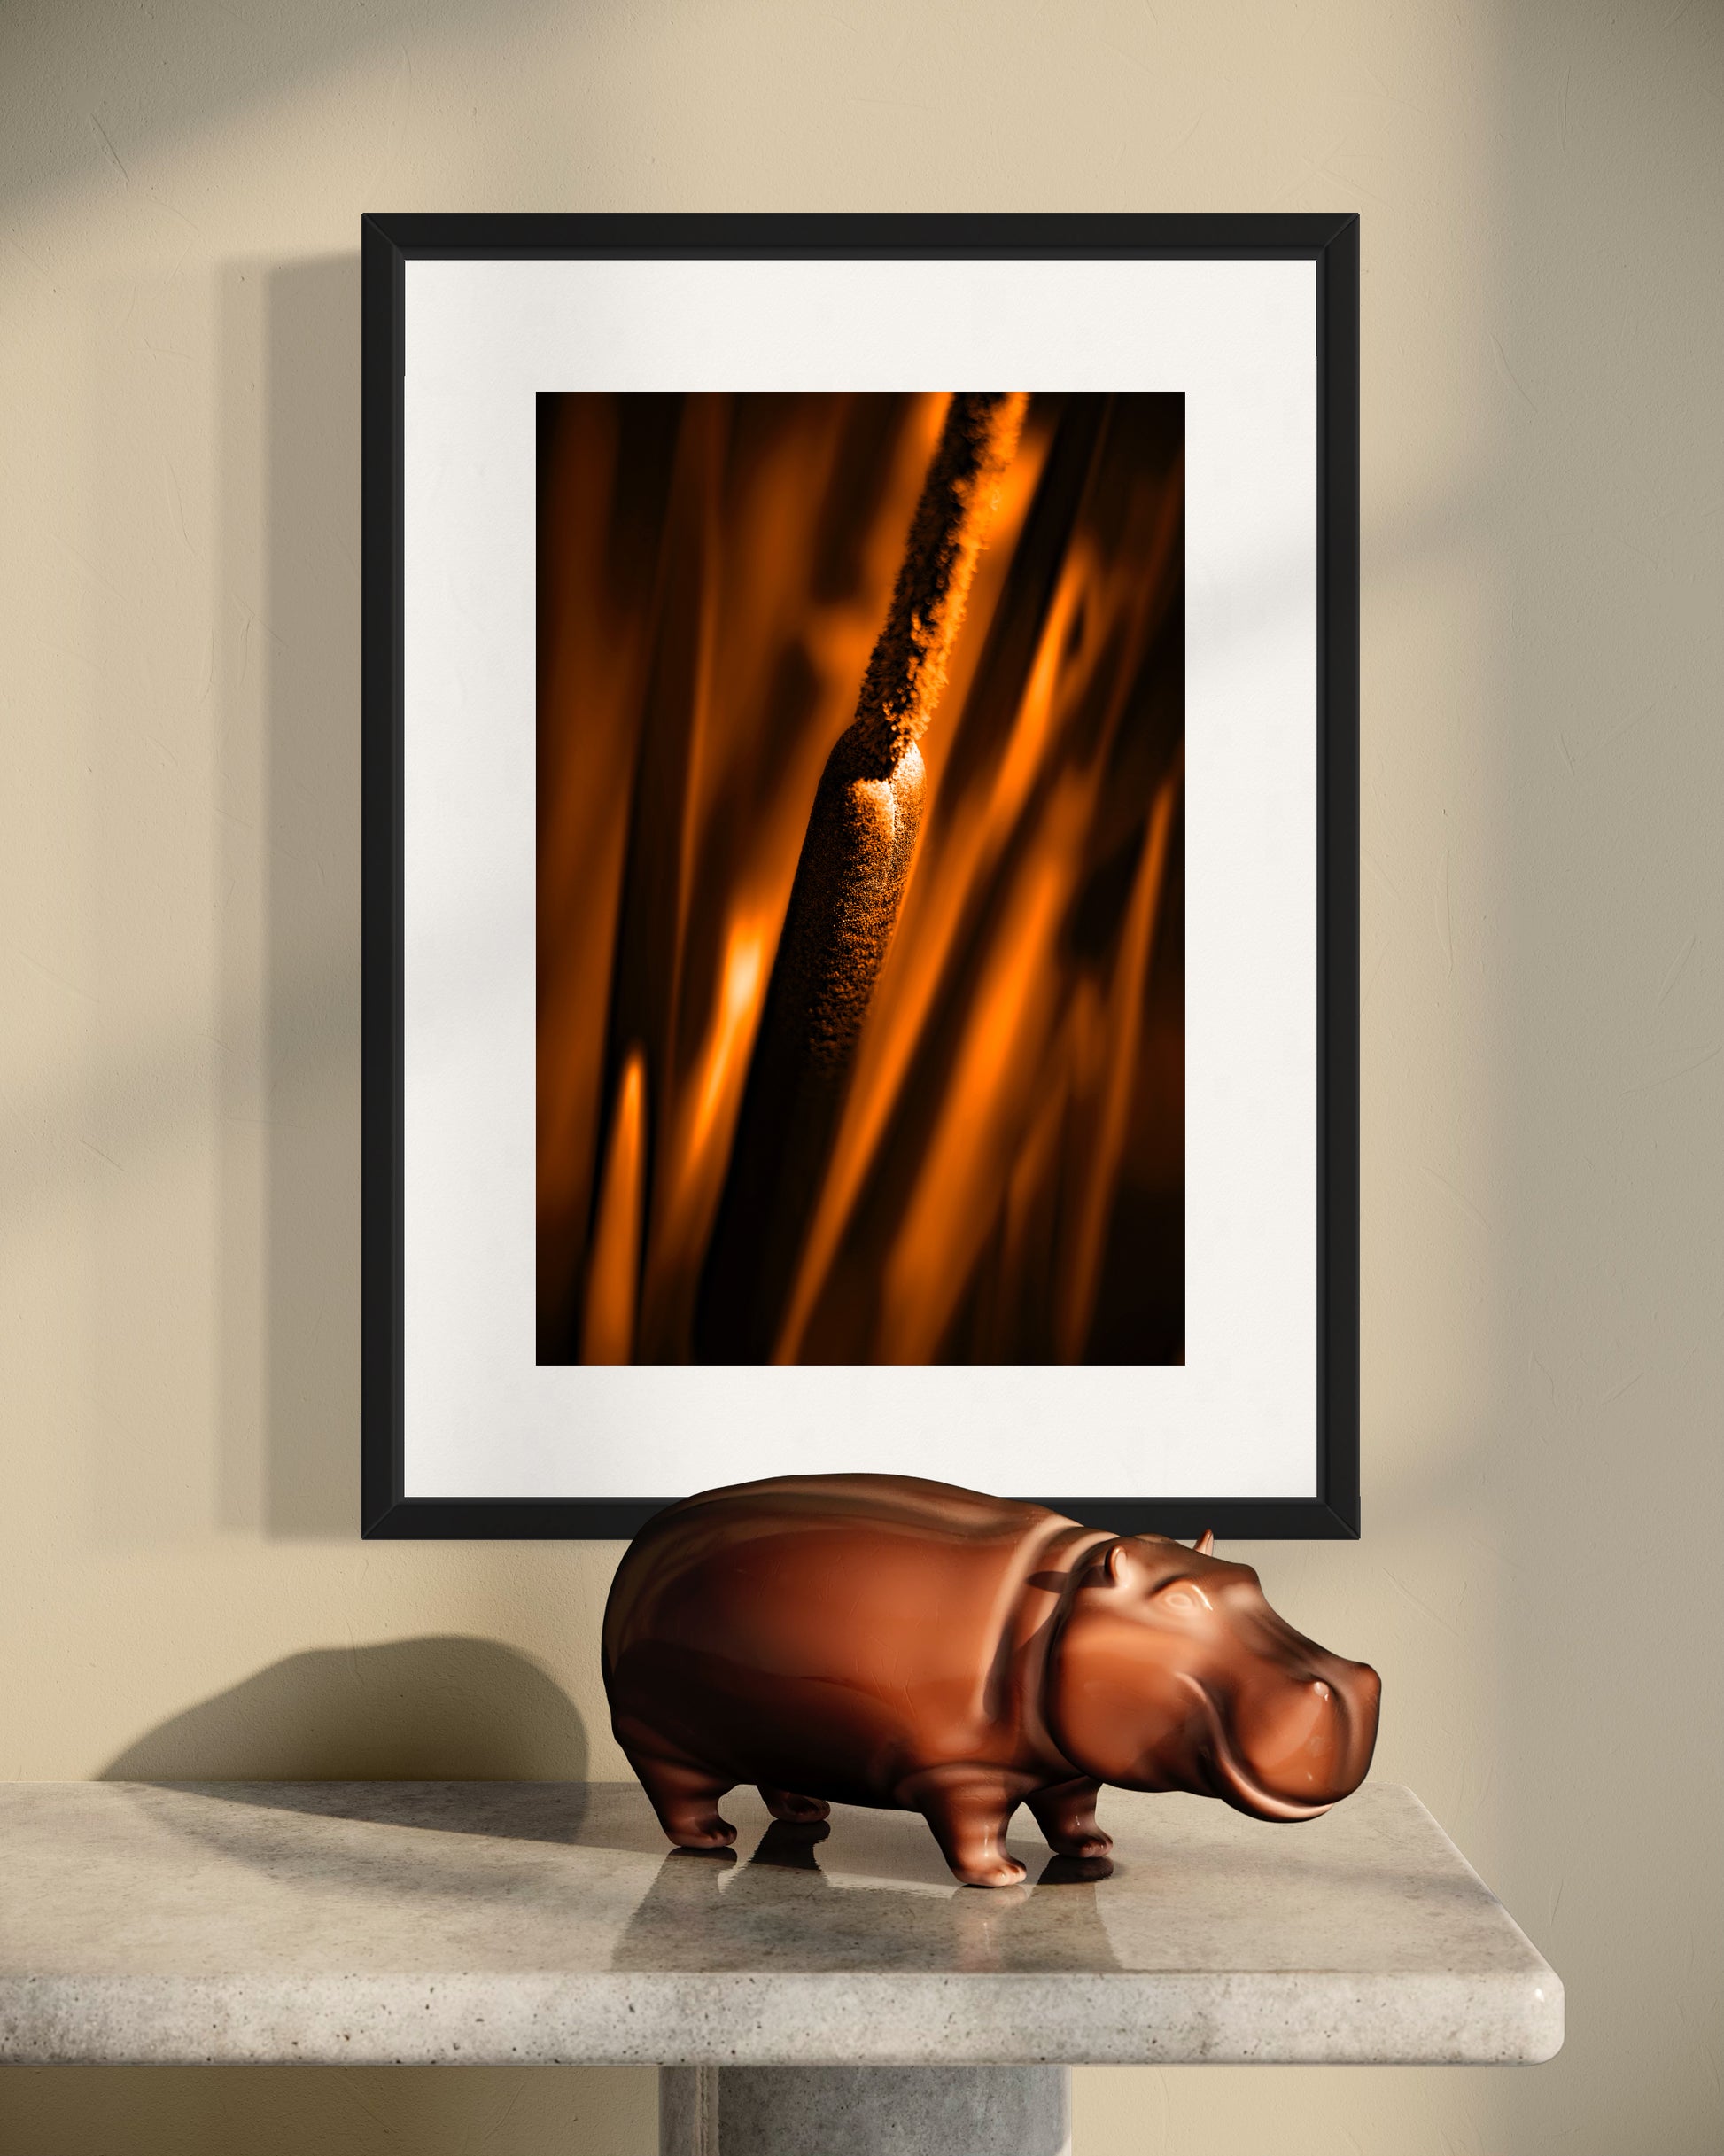 reeds in gold tone with selective focus photo in black frame on tan wall with hippo ceramic on concrete table